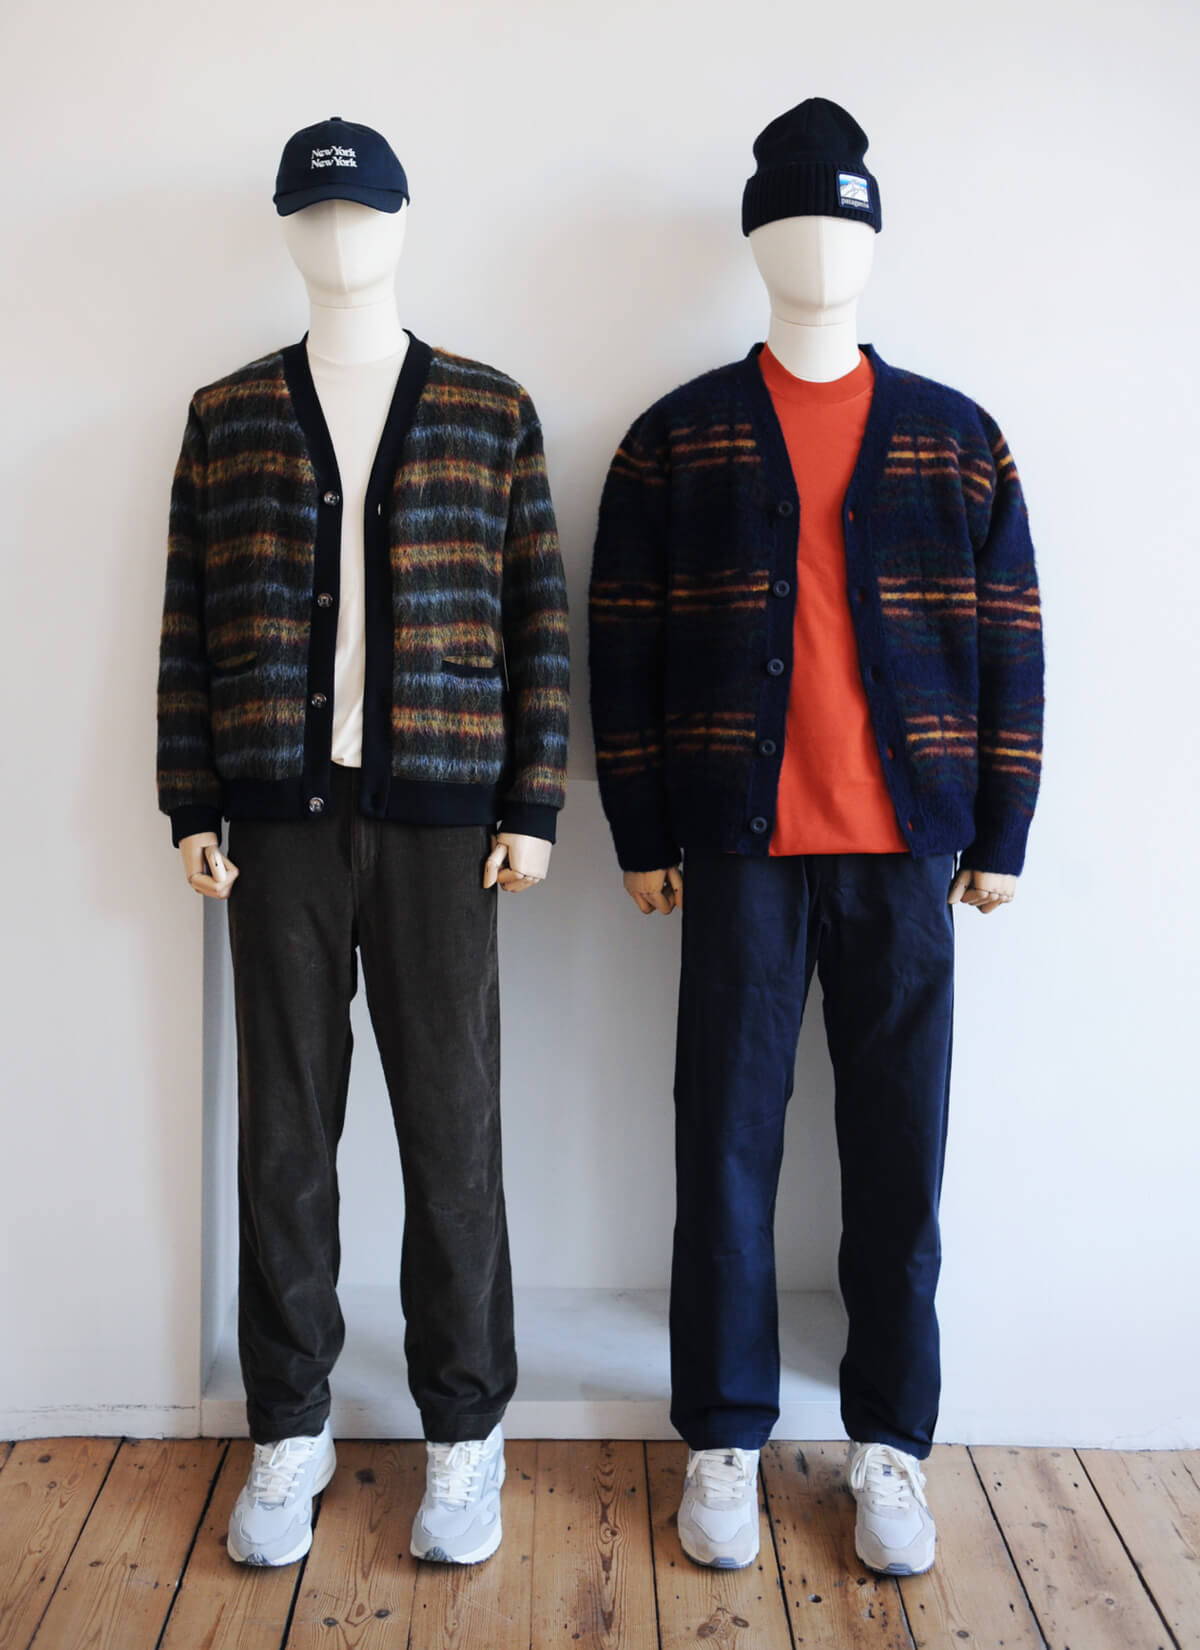 Two mannequins styled with statement knitwear for the festive season.